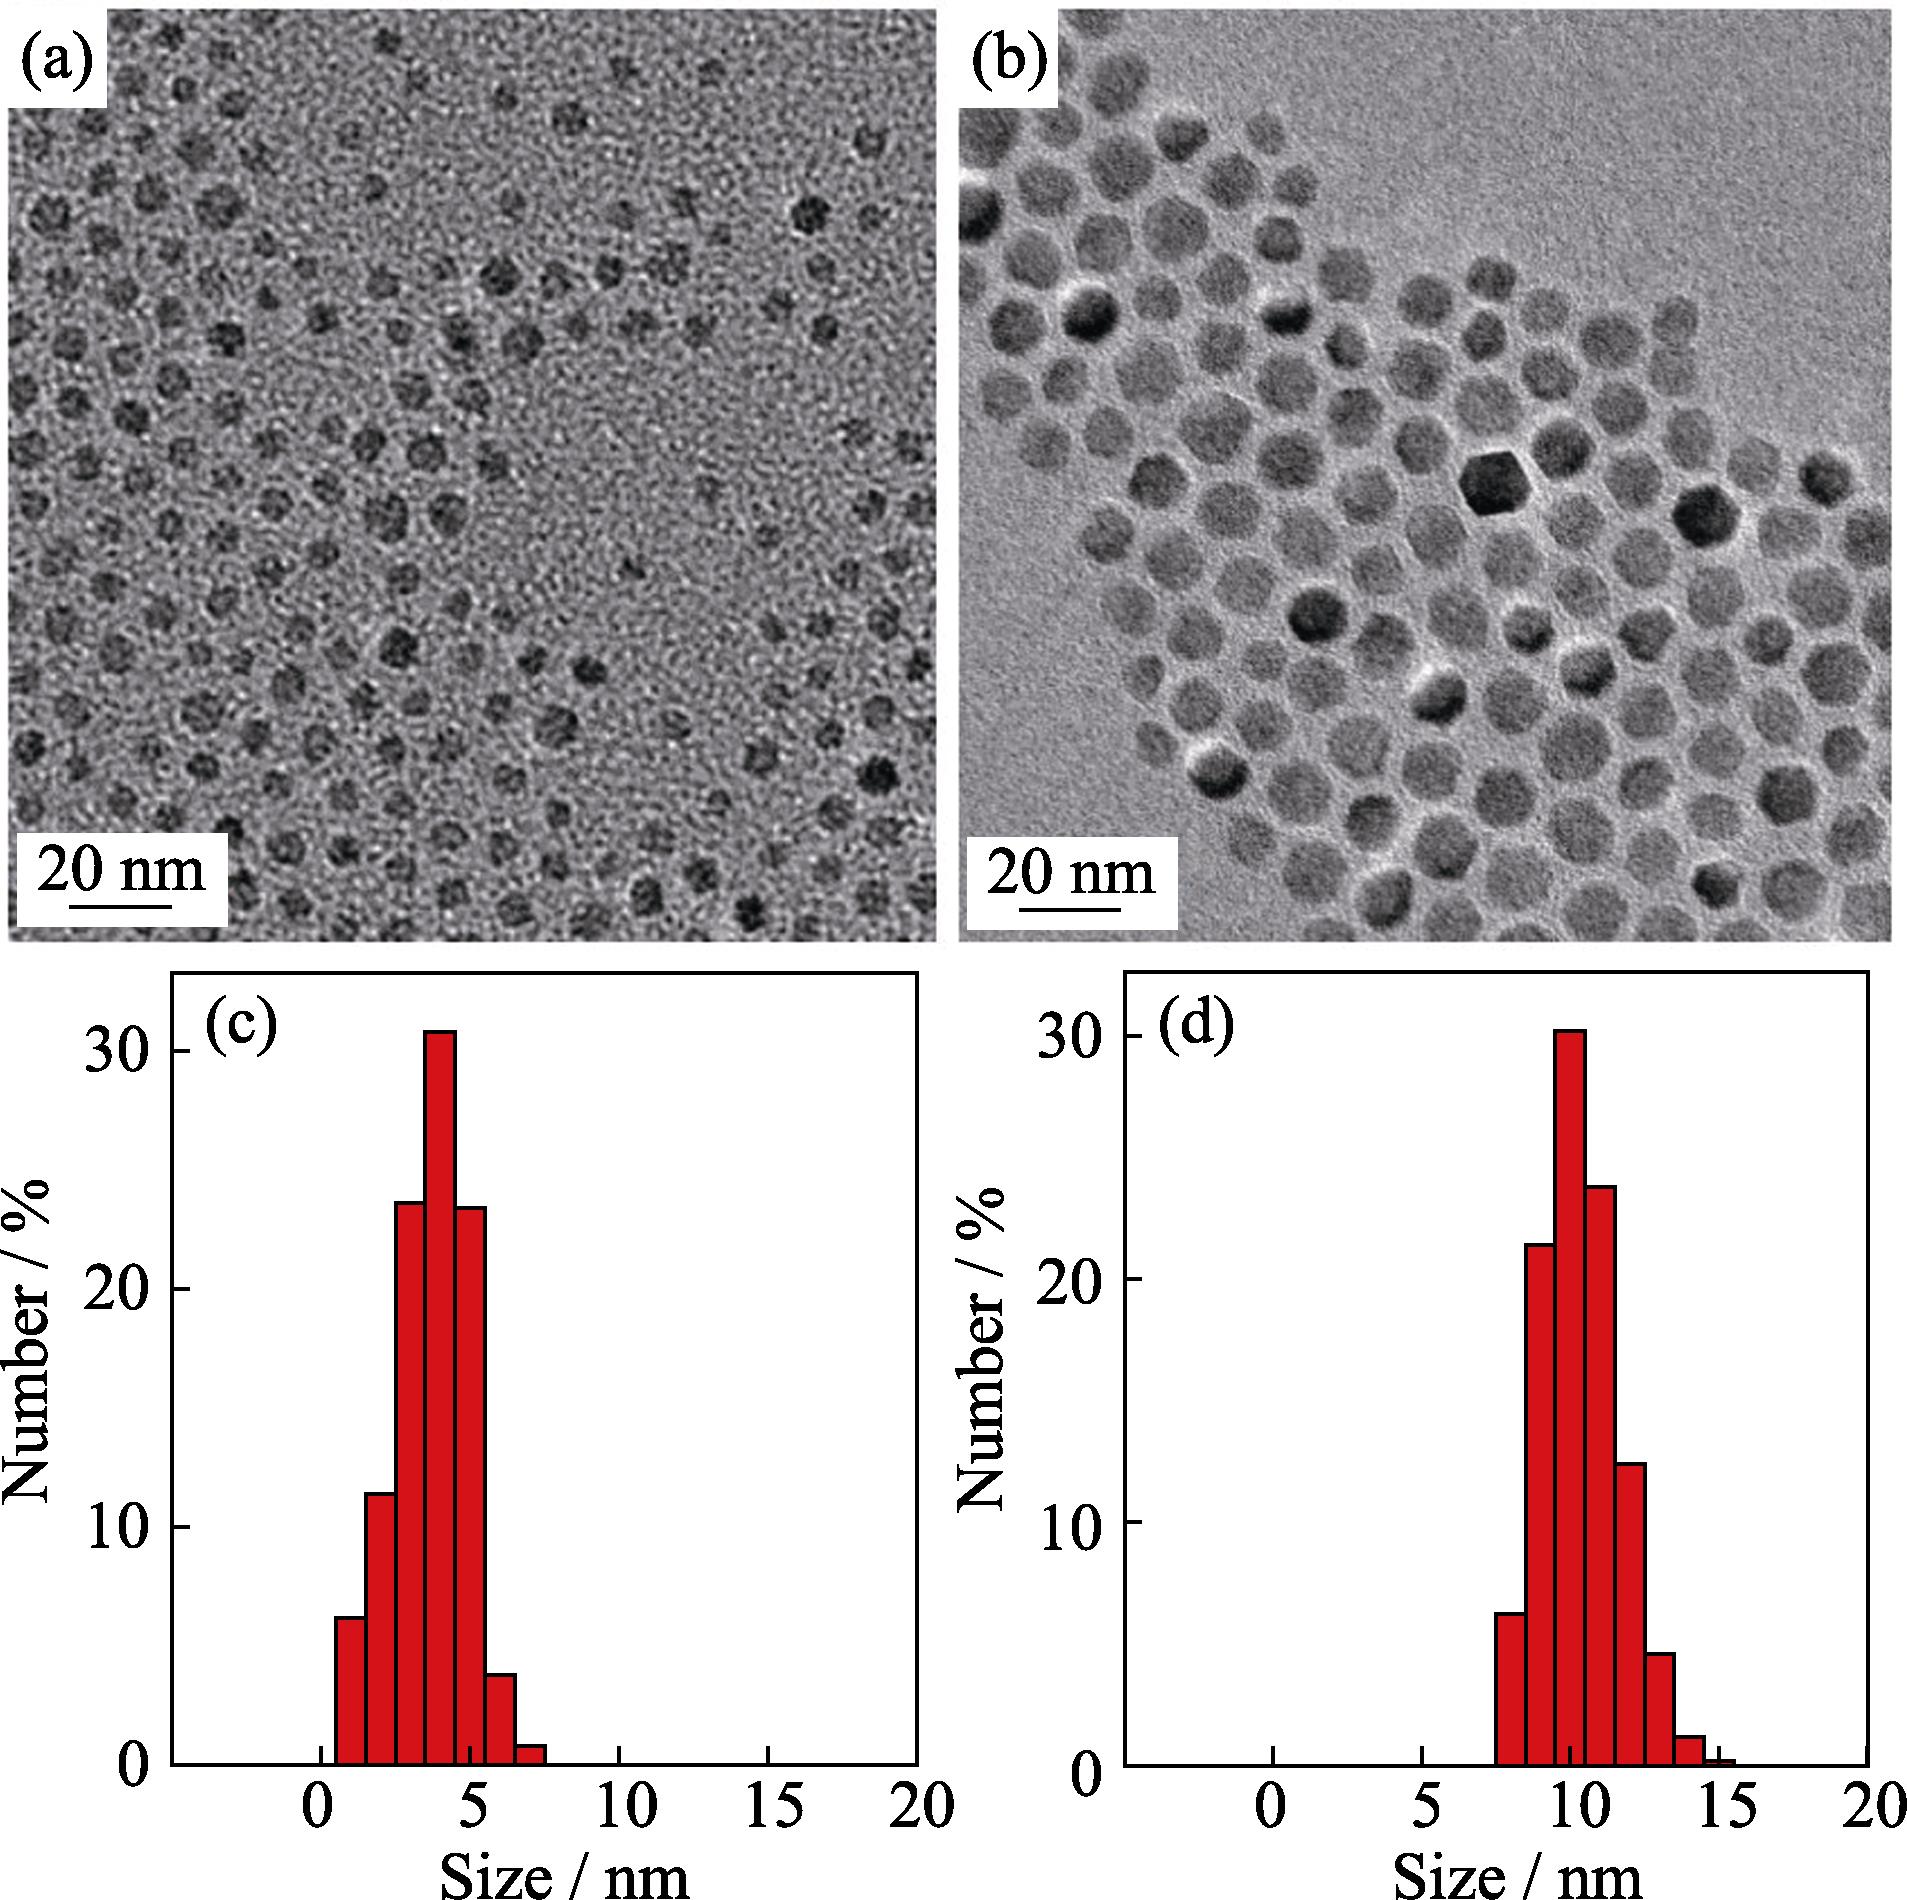 TEM images of ZnMn-Fe3O4 nanoparticles and histograms of their size distributions obtained by Fe(acac)3, Mn(acac)2 and Zn(acac)2 with (a, c) and without (b, d) adding 1,2-hexadecanediol